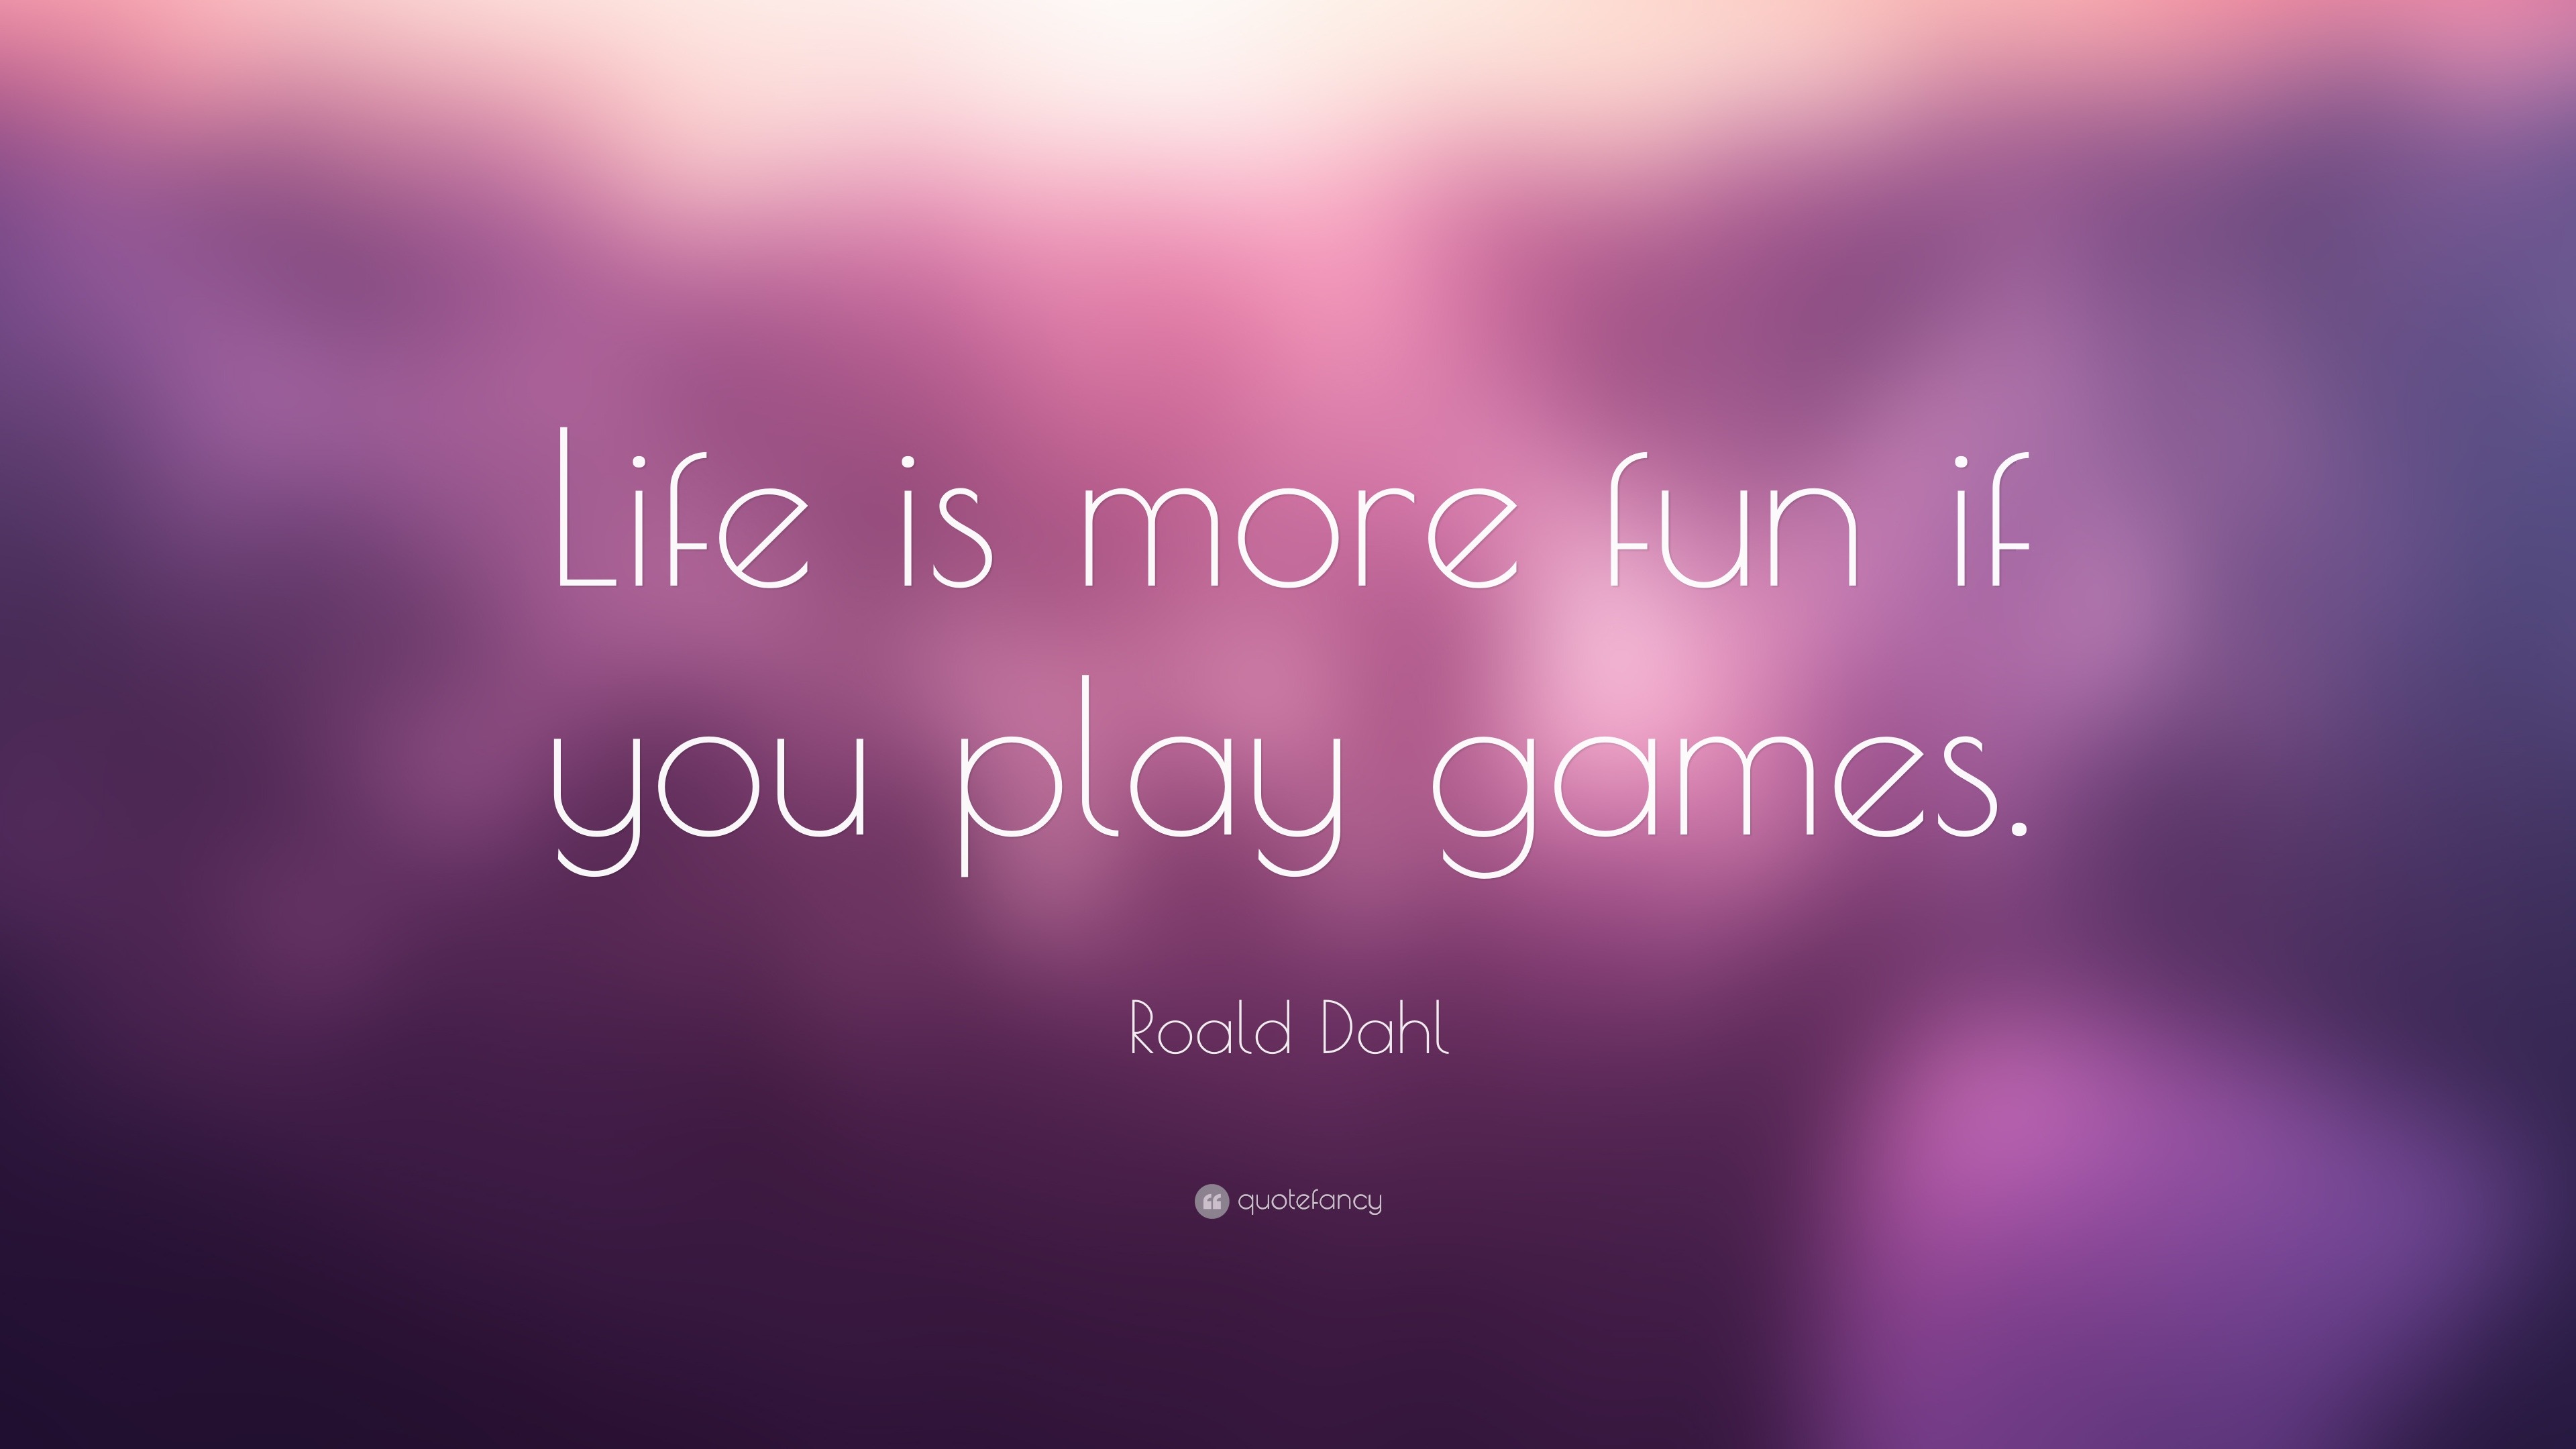 47 If You Play Games famous quotes: Roald Dahl: Life is more fun